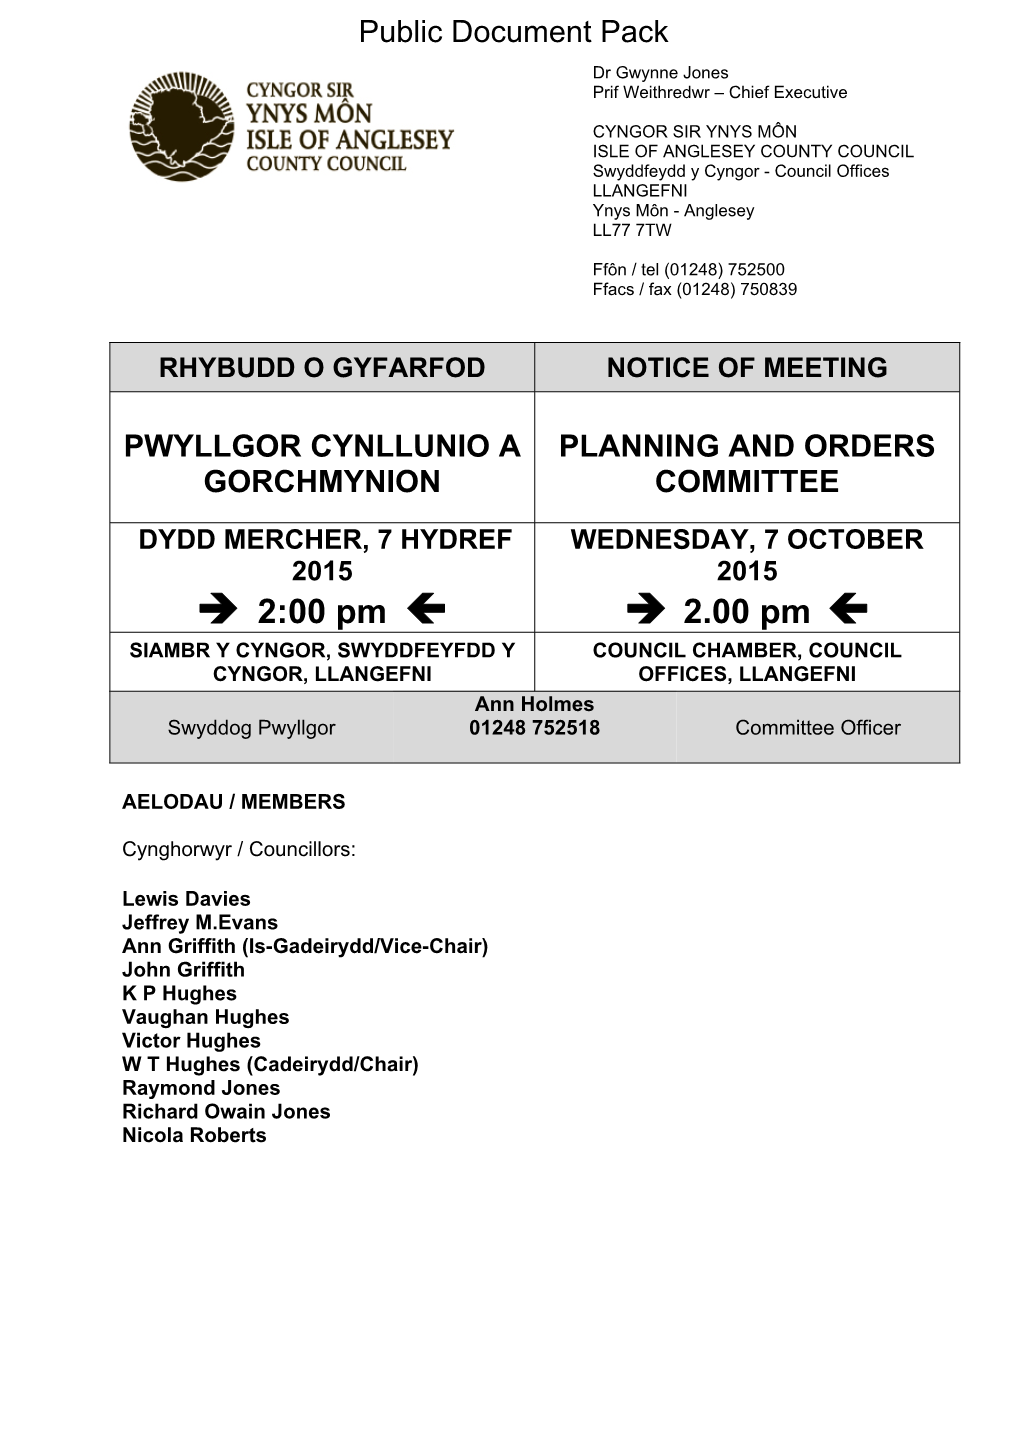 (Public Pack)Agenda Document for Planning and Orders Committee, 07